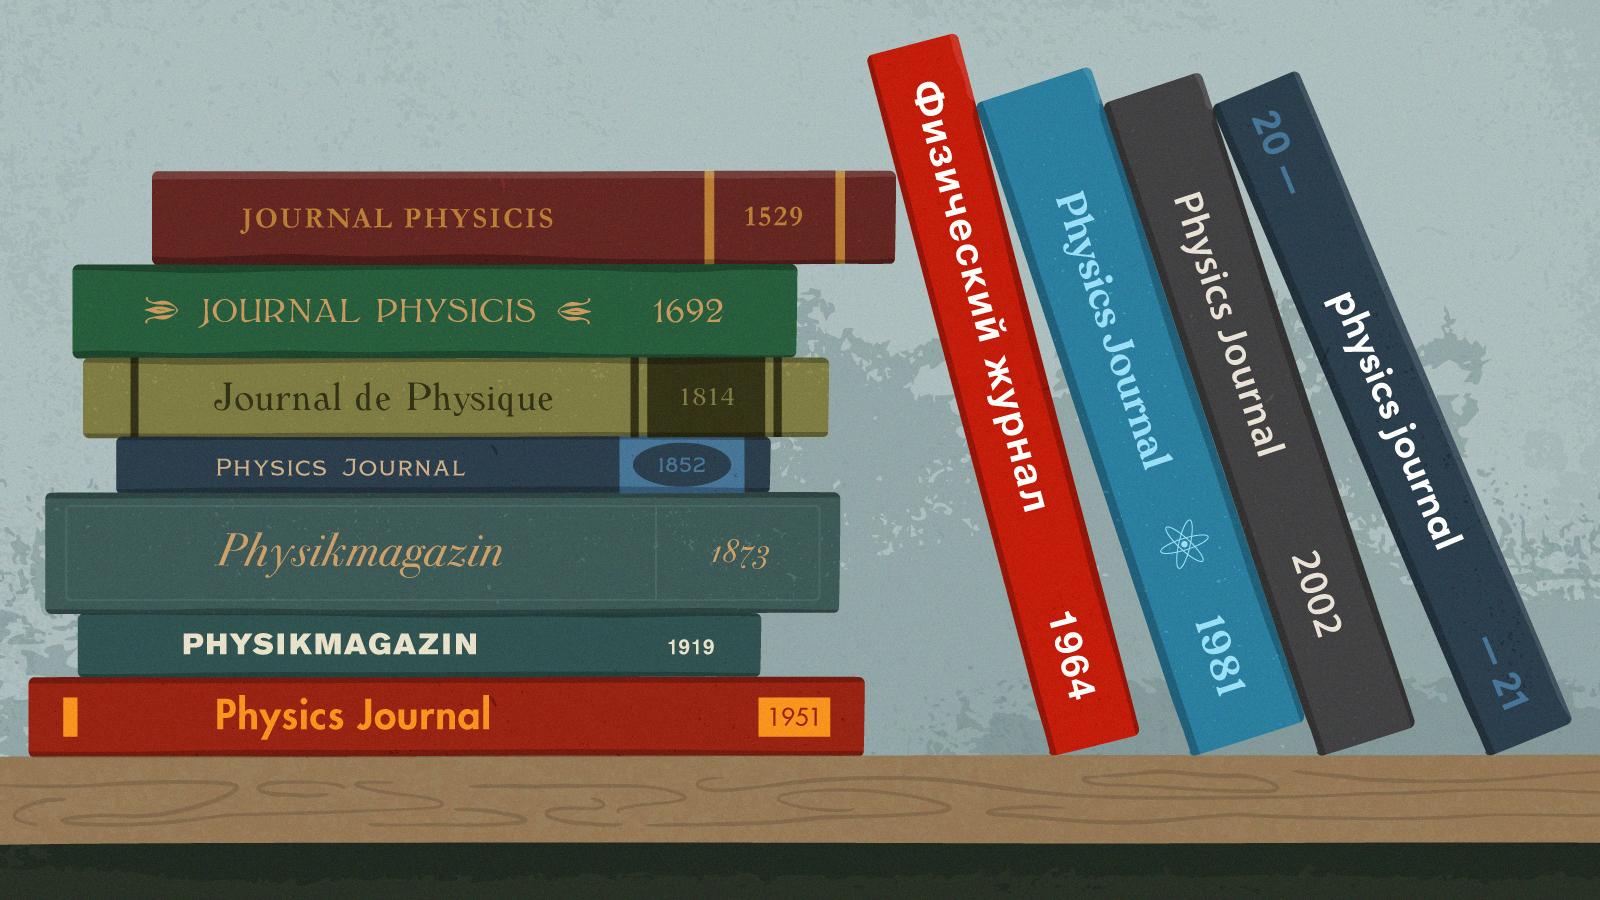 Illustration of physics journals in many languages